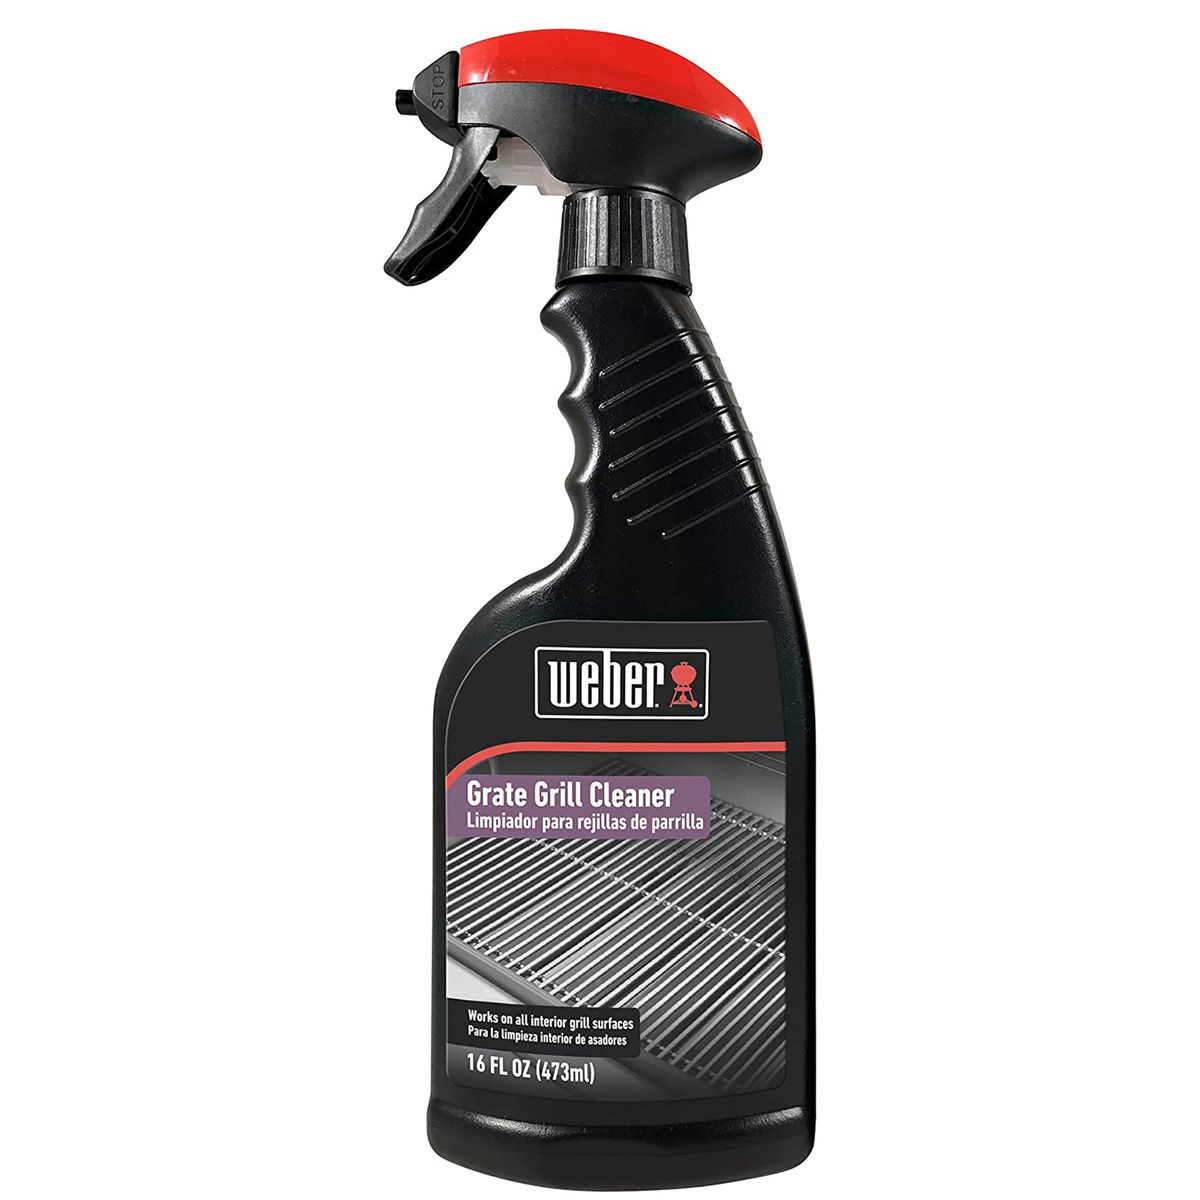 grill cleaners roundup